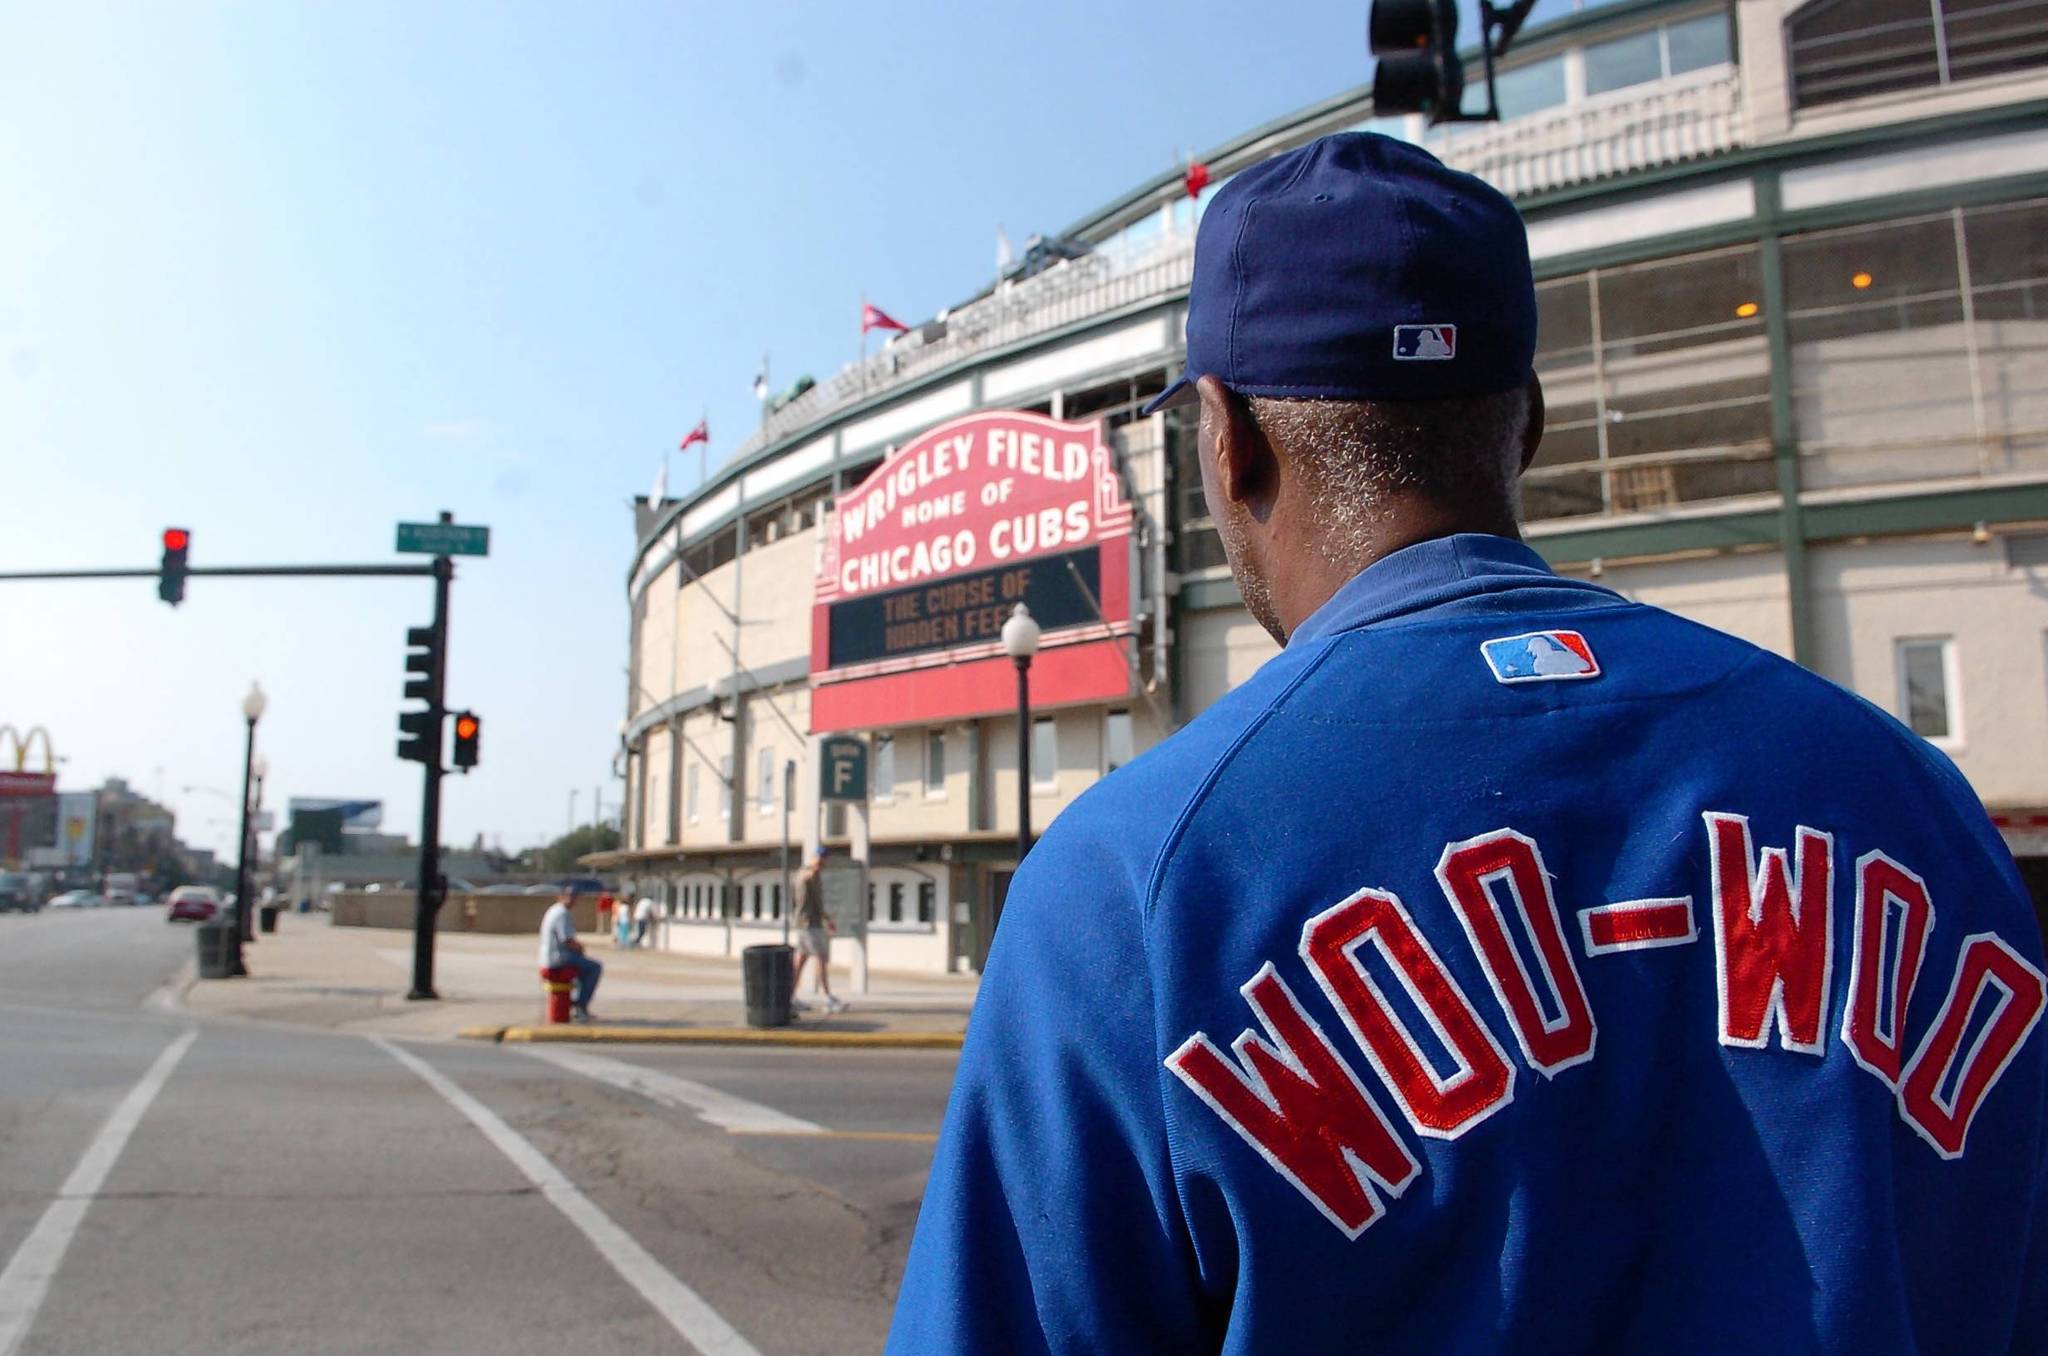 Chicago Cubs superfan Ronnie 'Woo Woo' Wickers gets own bobble head